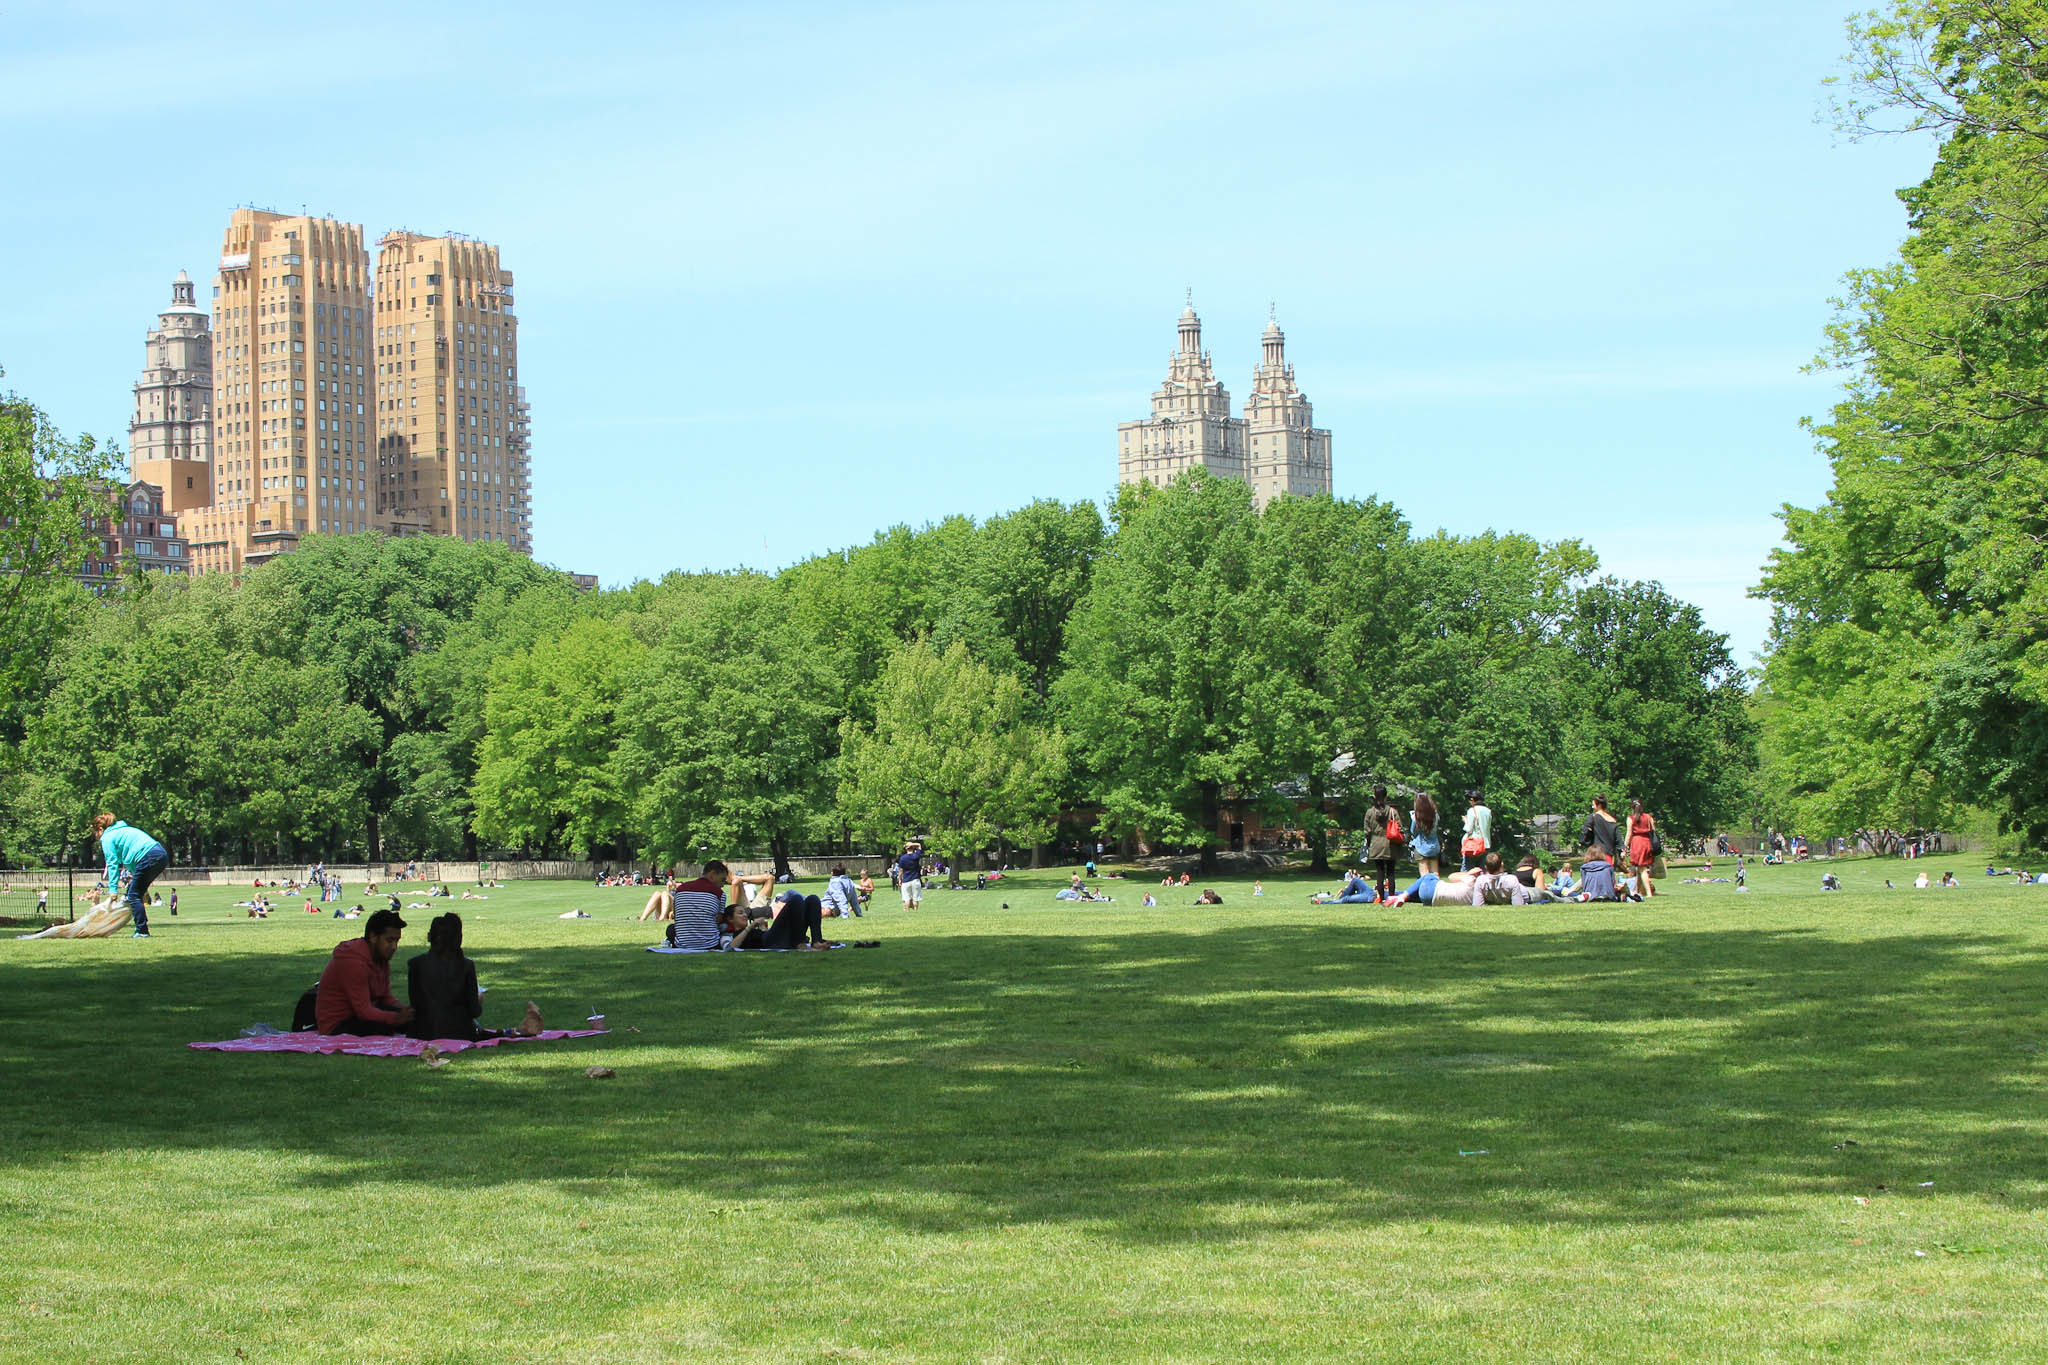 The Best Parks in NYC for Sports, Concerts, Picnics and More